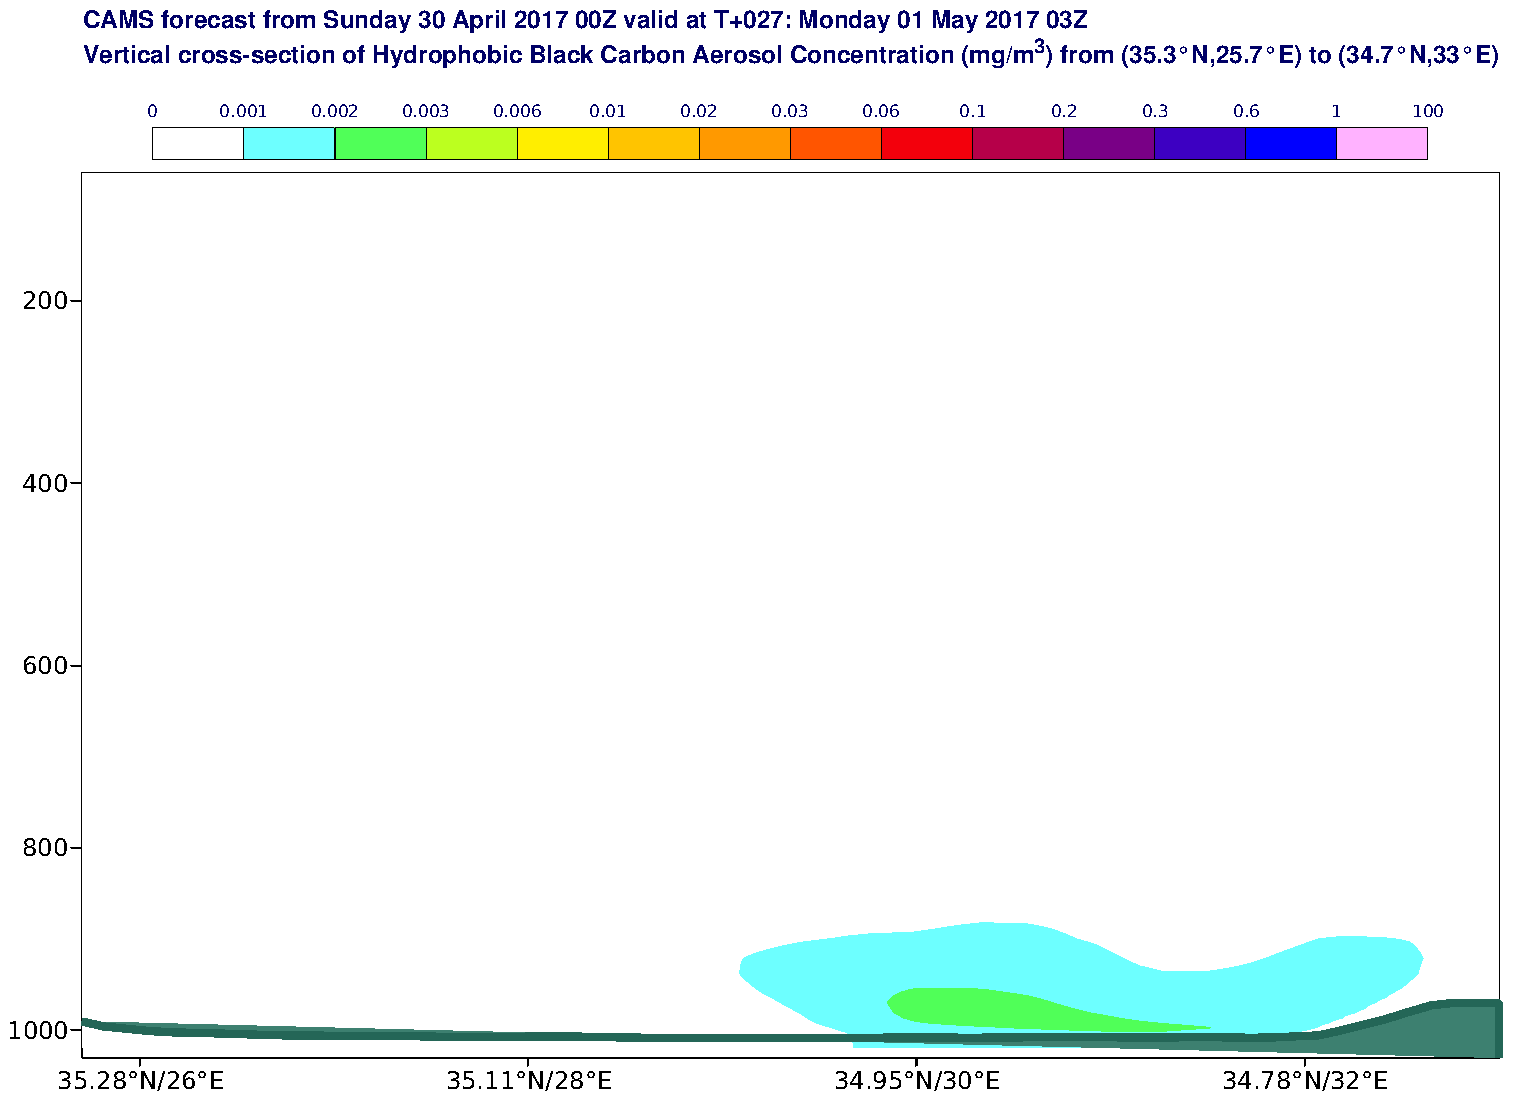 Vertical cross-section of Hydrophobic Black Carbon Aerosol Concentration (mg/m3) valid at T27 - 2017-05-01 03:00